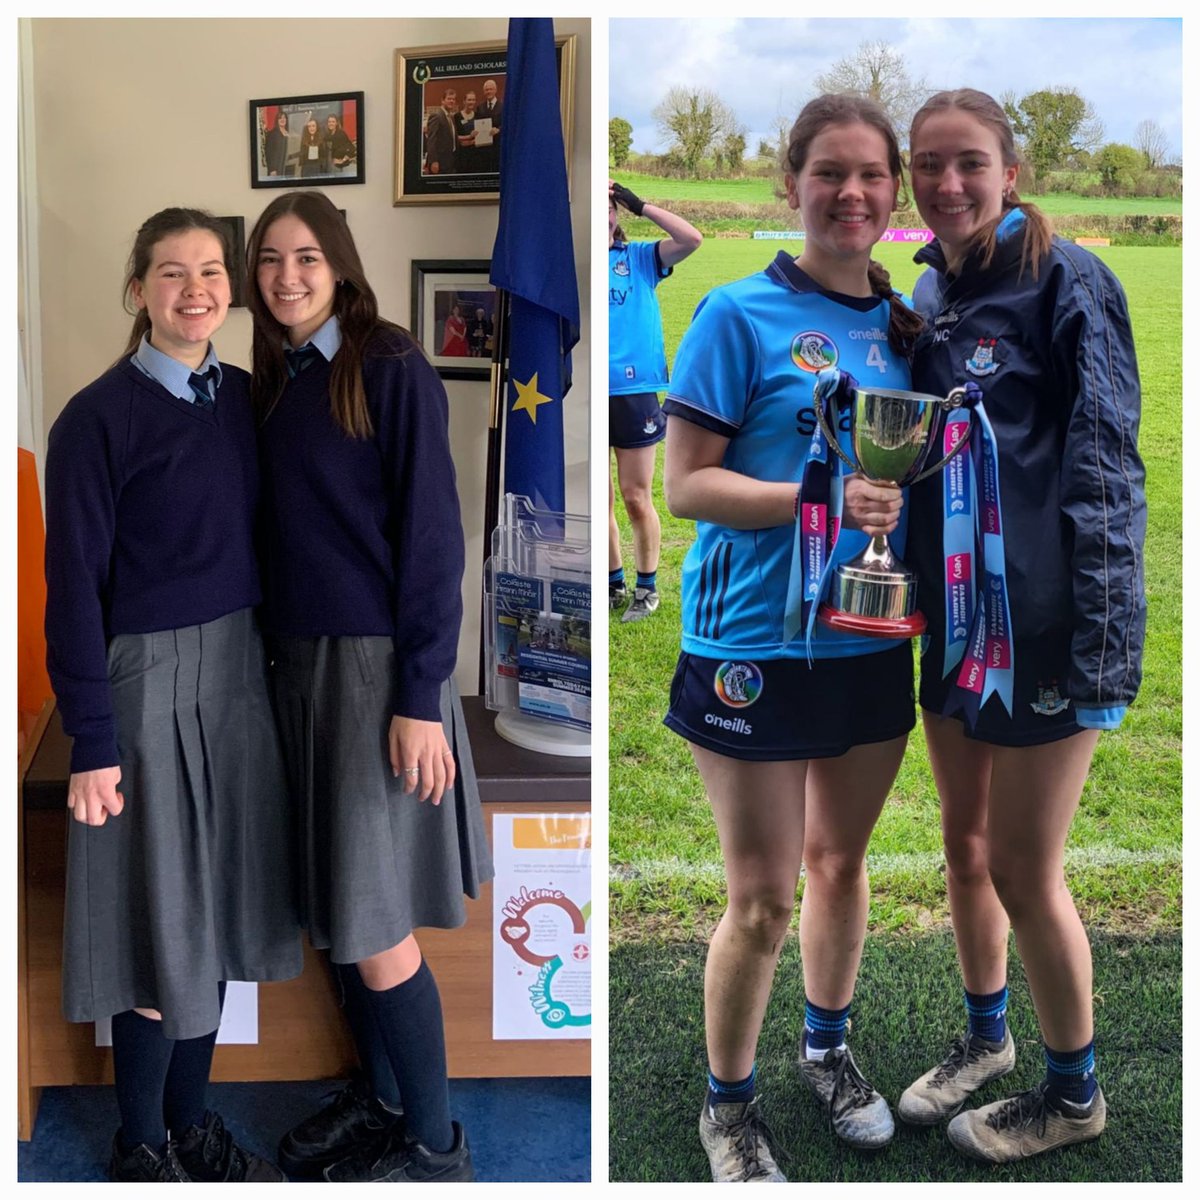 Exceptionally busy day for these two amazingly talented @ManorHseRaheny 6th years. Leaving Cert Oral Exams in the morning and National League Final in the afternoon 👩‍🎓👩‍🎓🏆 @CamogieDublin @Staycity @very_ireland #OurGameOurPassion #leavingcert #proudyearhead